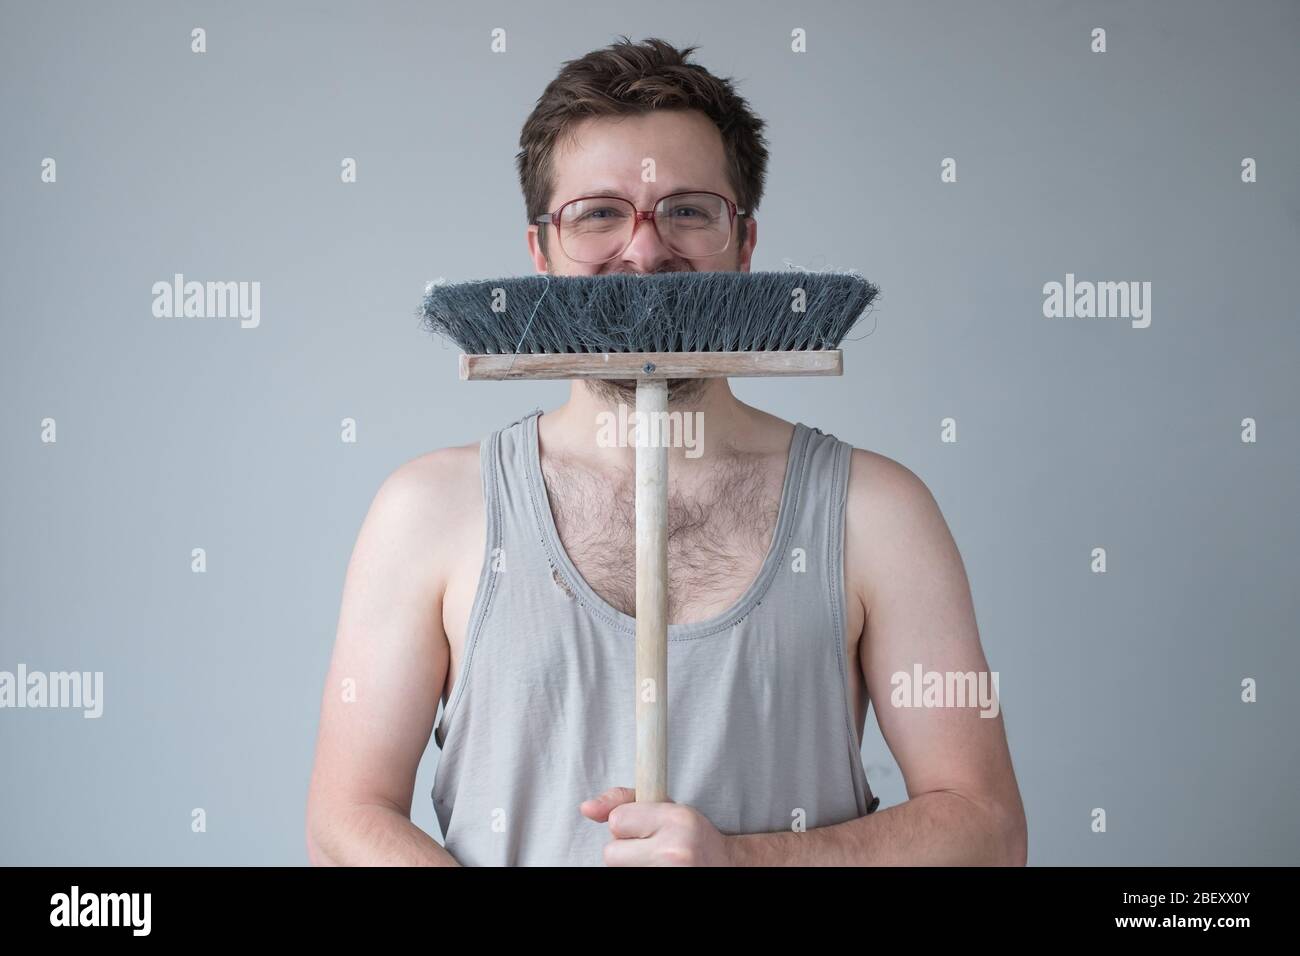 Young man standing ready for cleaning floor with mop. Studio shot Stock Photo